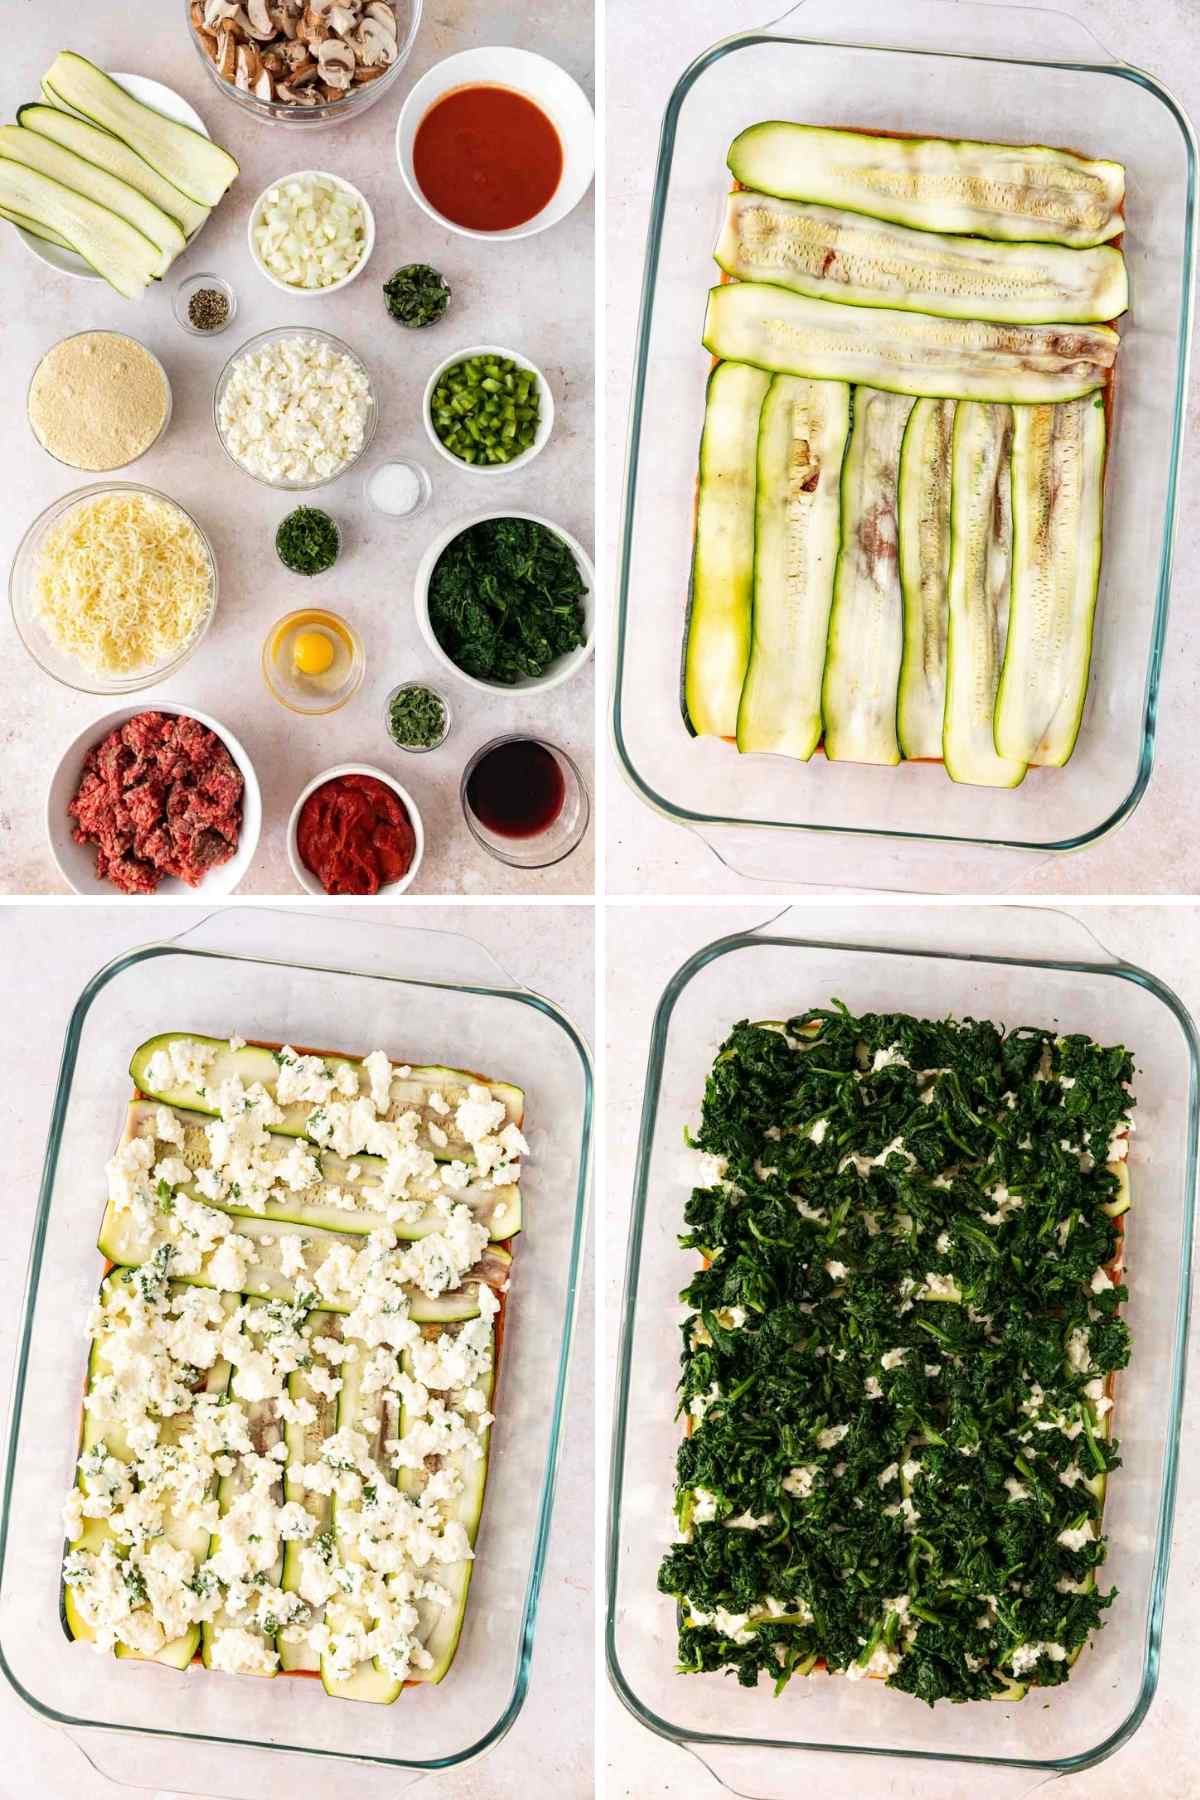 Zucchini Lasagna ingredients and layers in baking dish